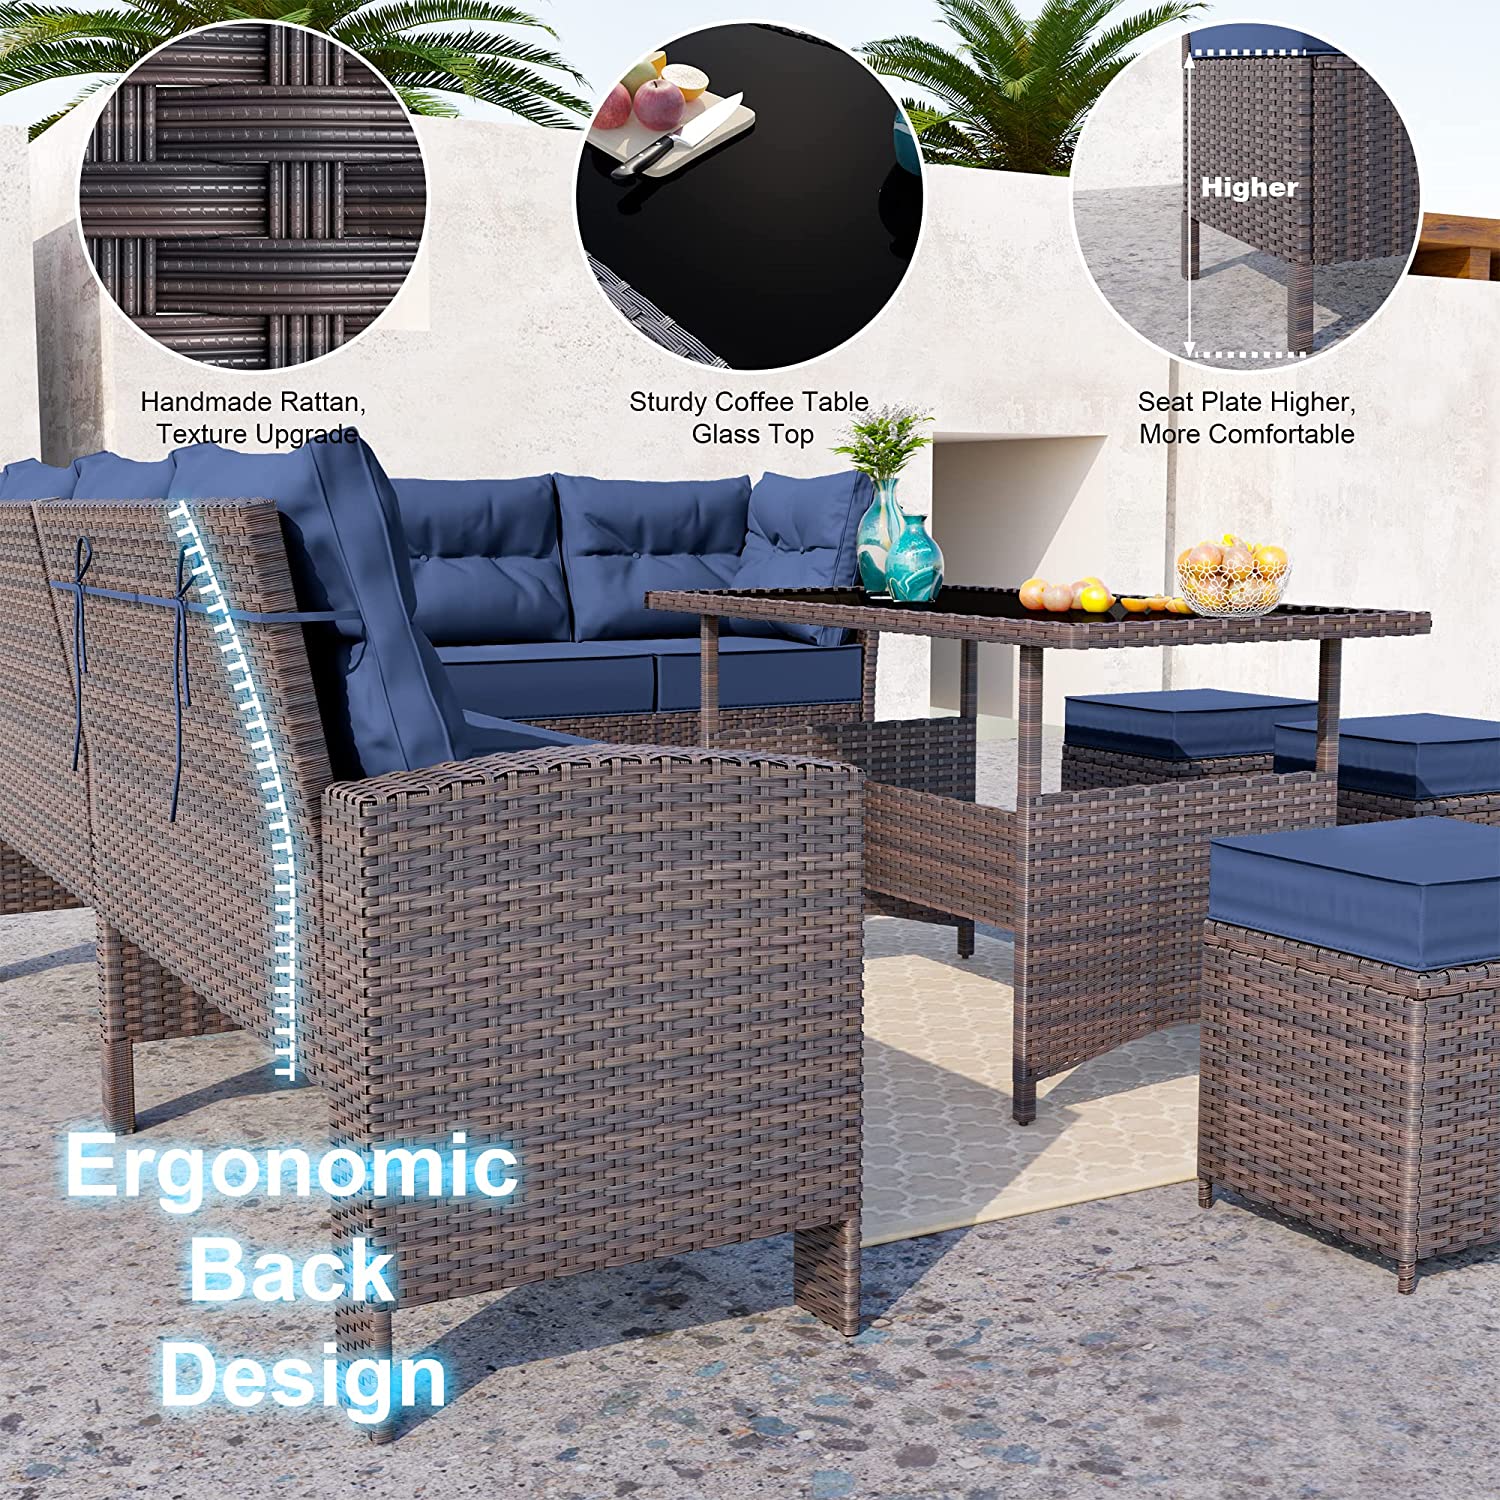 Kullavik 7 Pieces Outdoor Patio Furniture Set, All-Weather Patio Outdoor Dining Conversation Sectional Set with Coffee Table, Wicker Sofas, Ottomans, Removable Cushions,Navy Blue - image 3 of 7